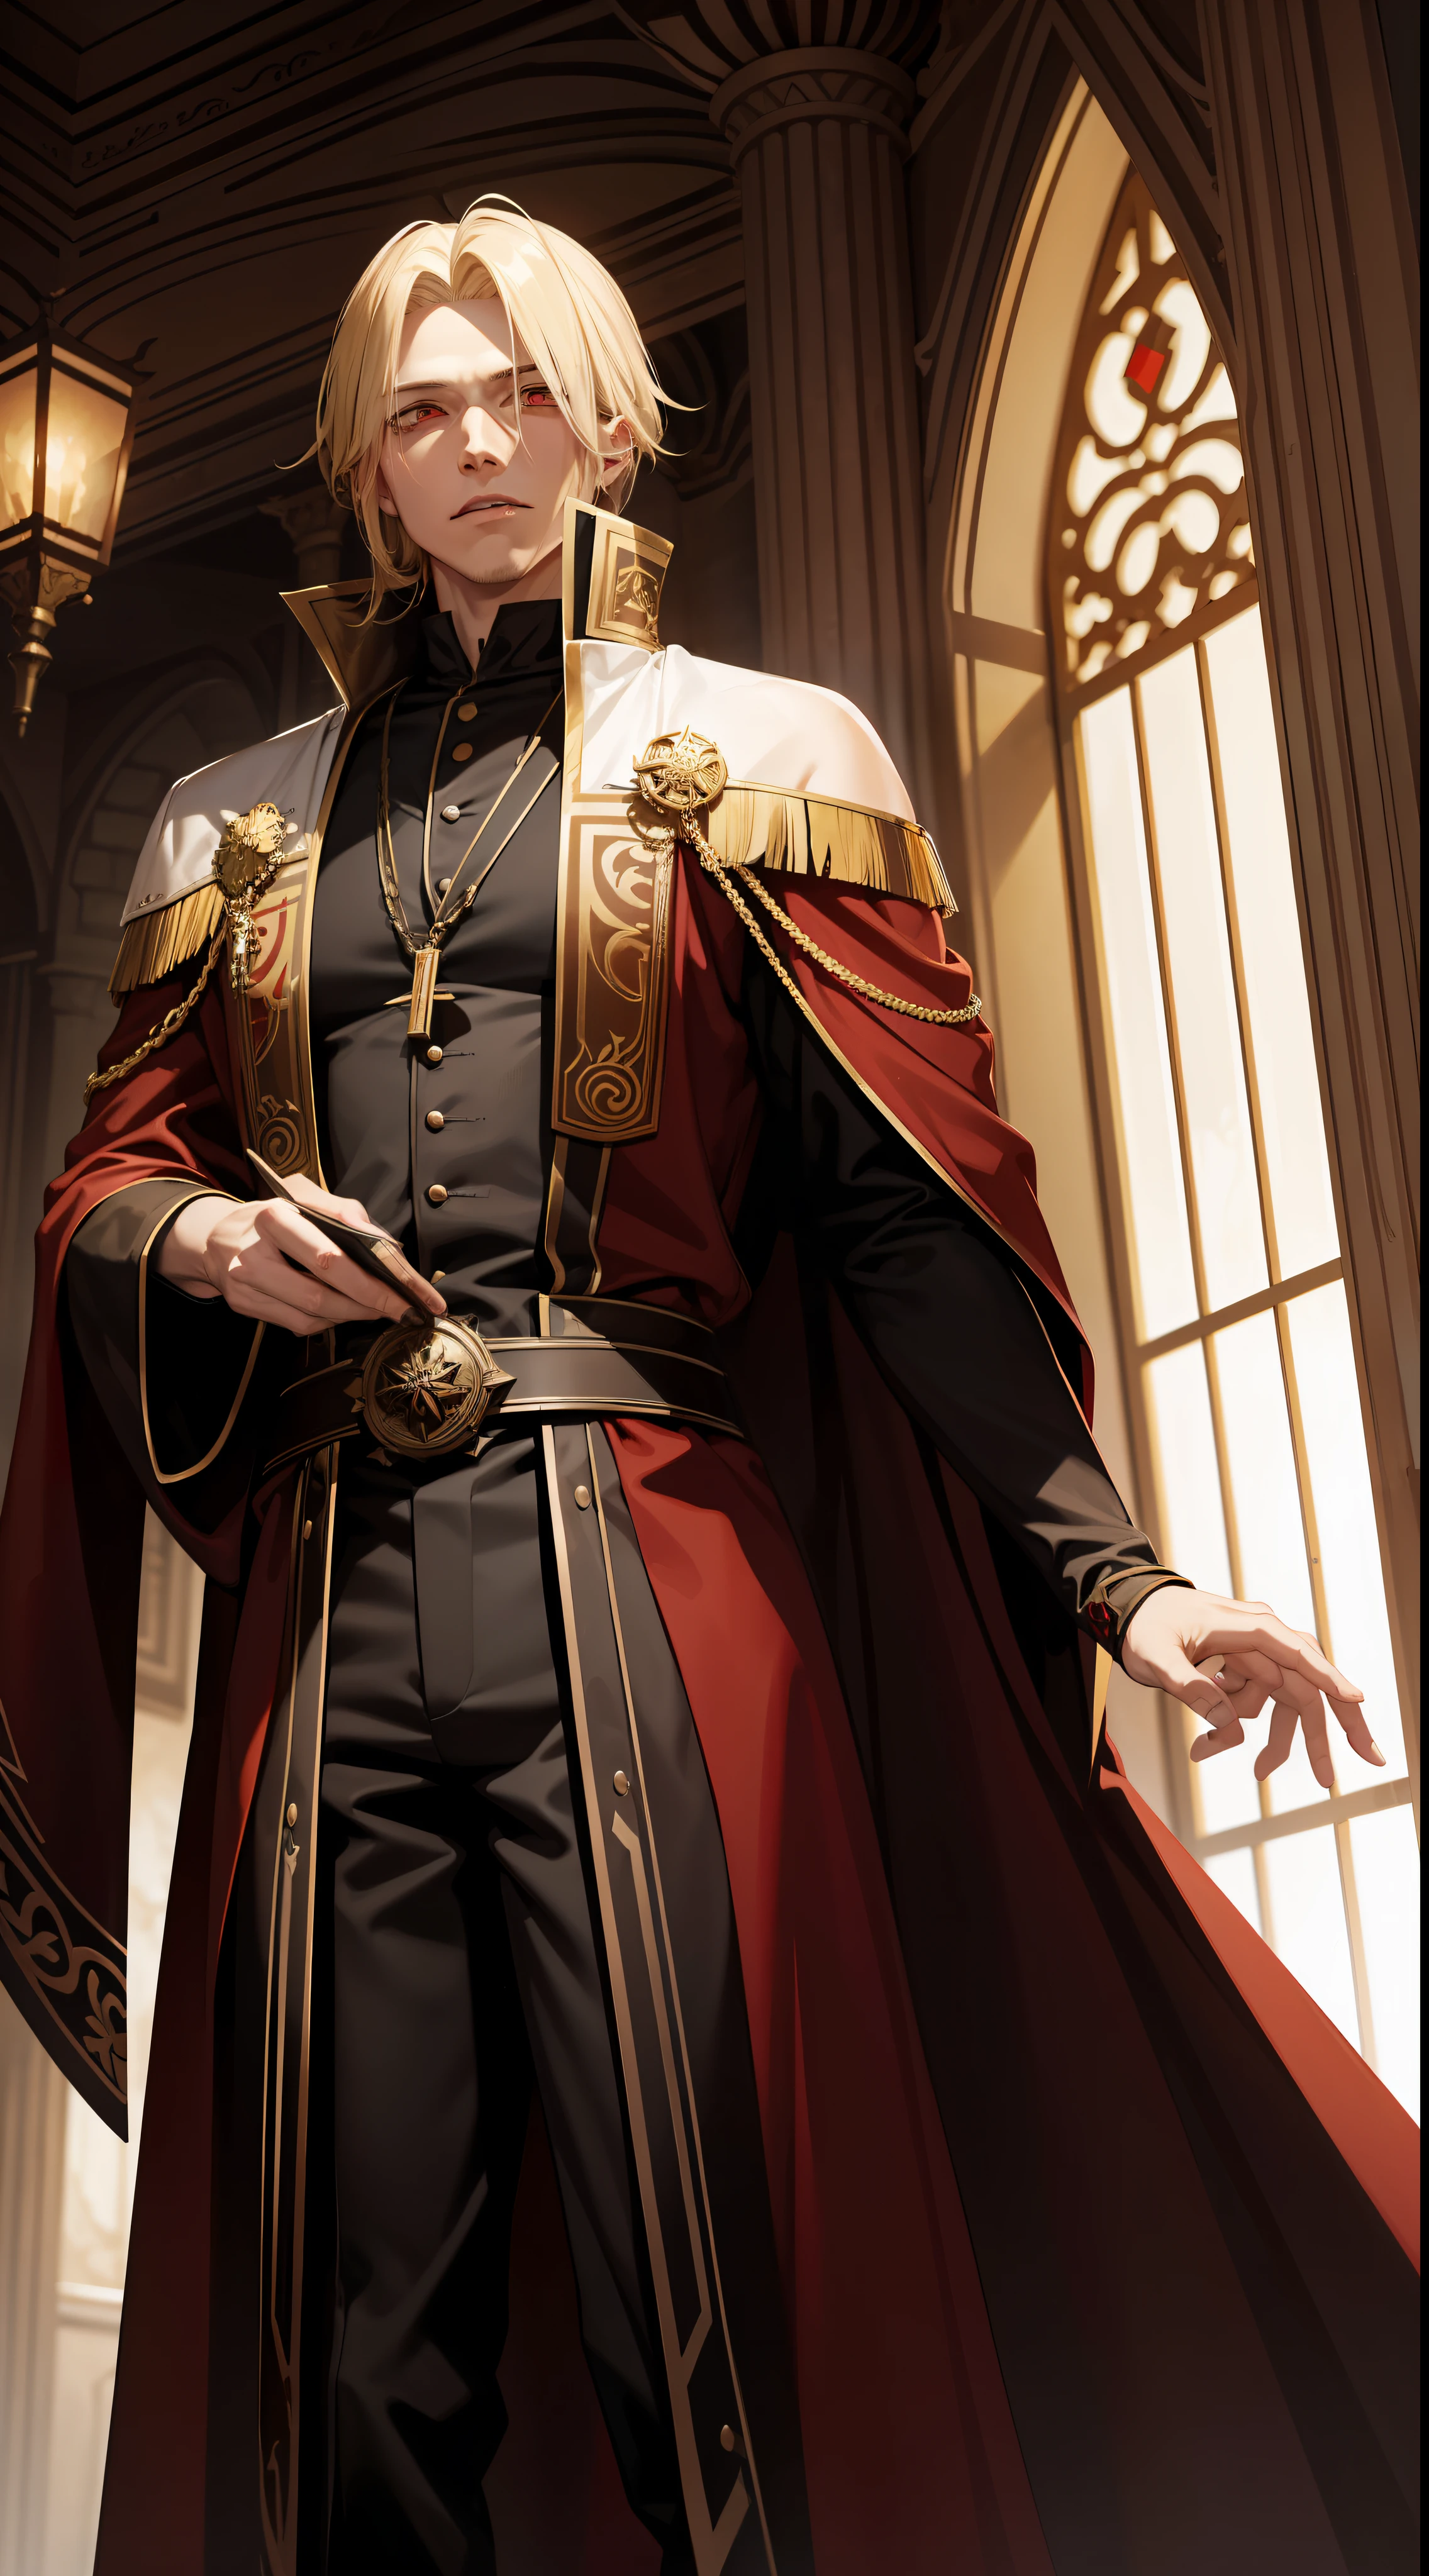 A 29-year-old man, a vampire king with blonde hair and red eyes, he wears a brown robe